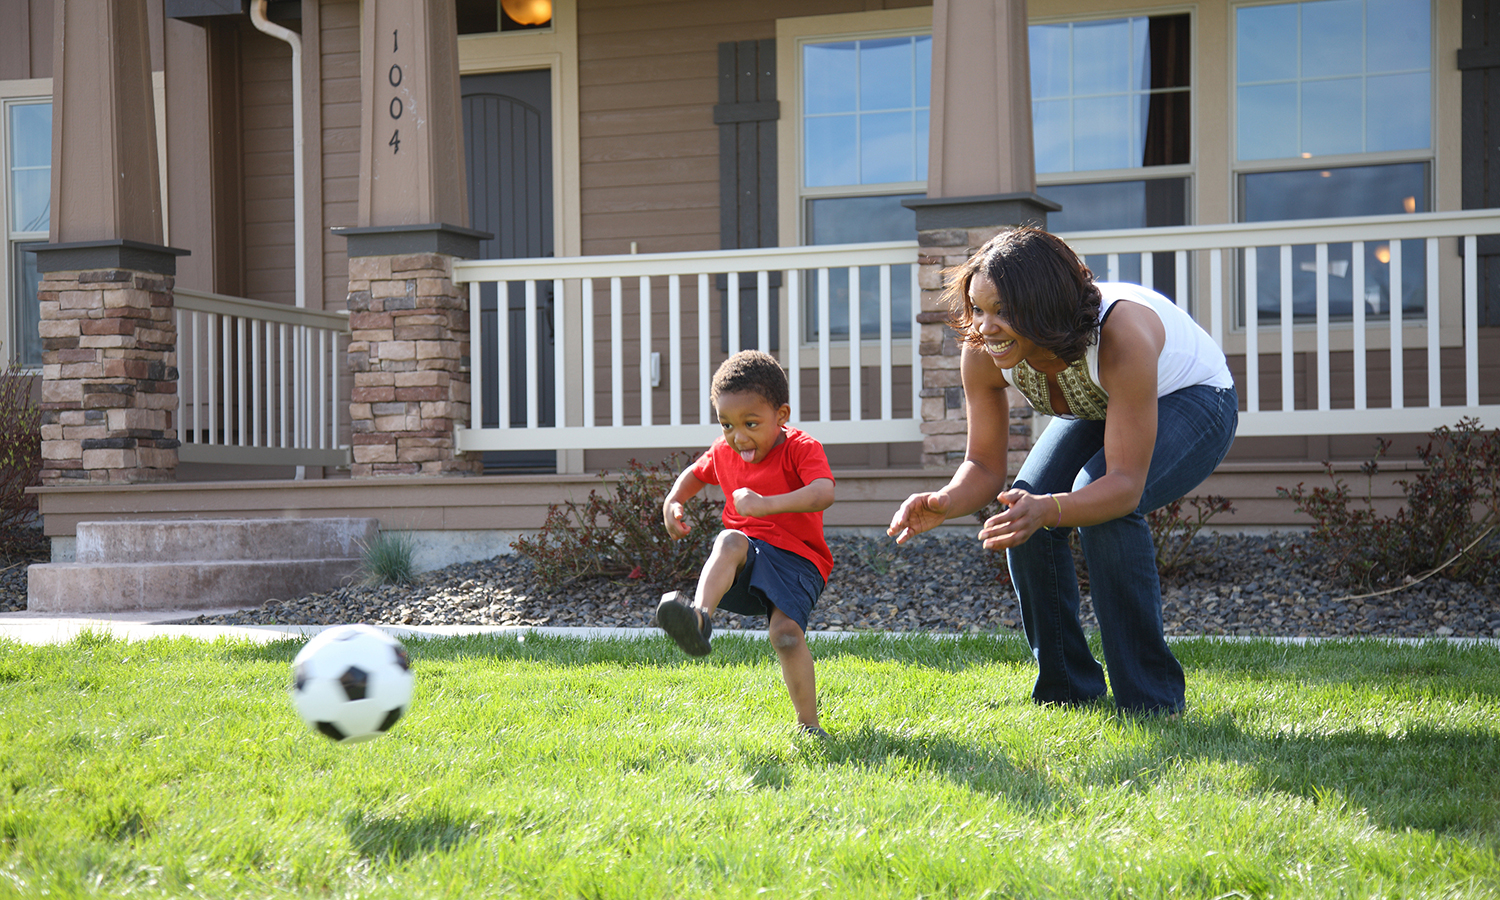 Boy and woman playing soccer in front of house